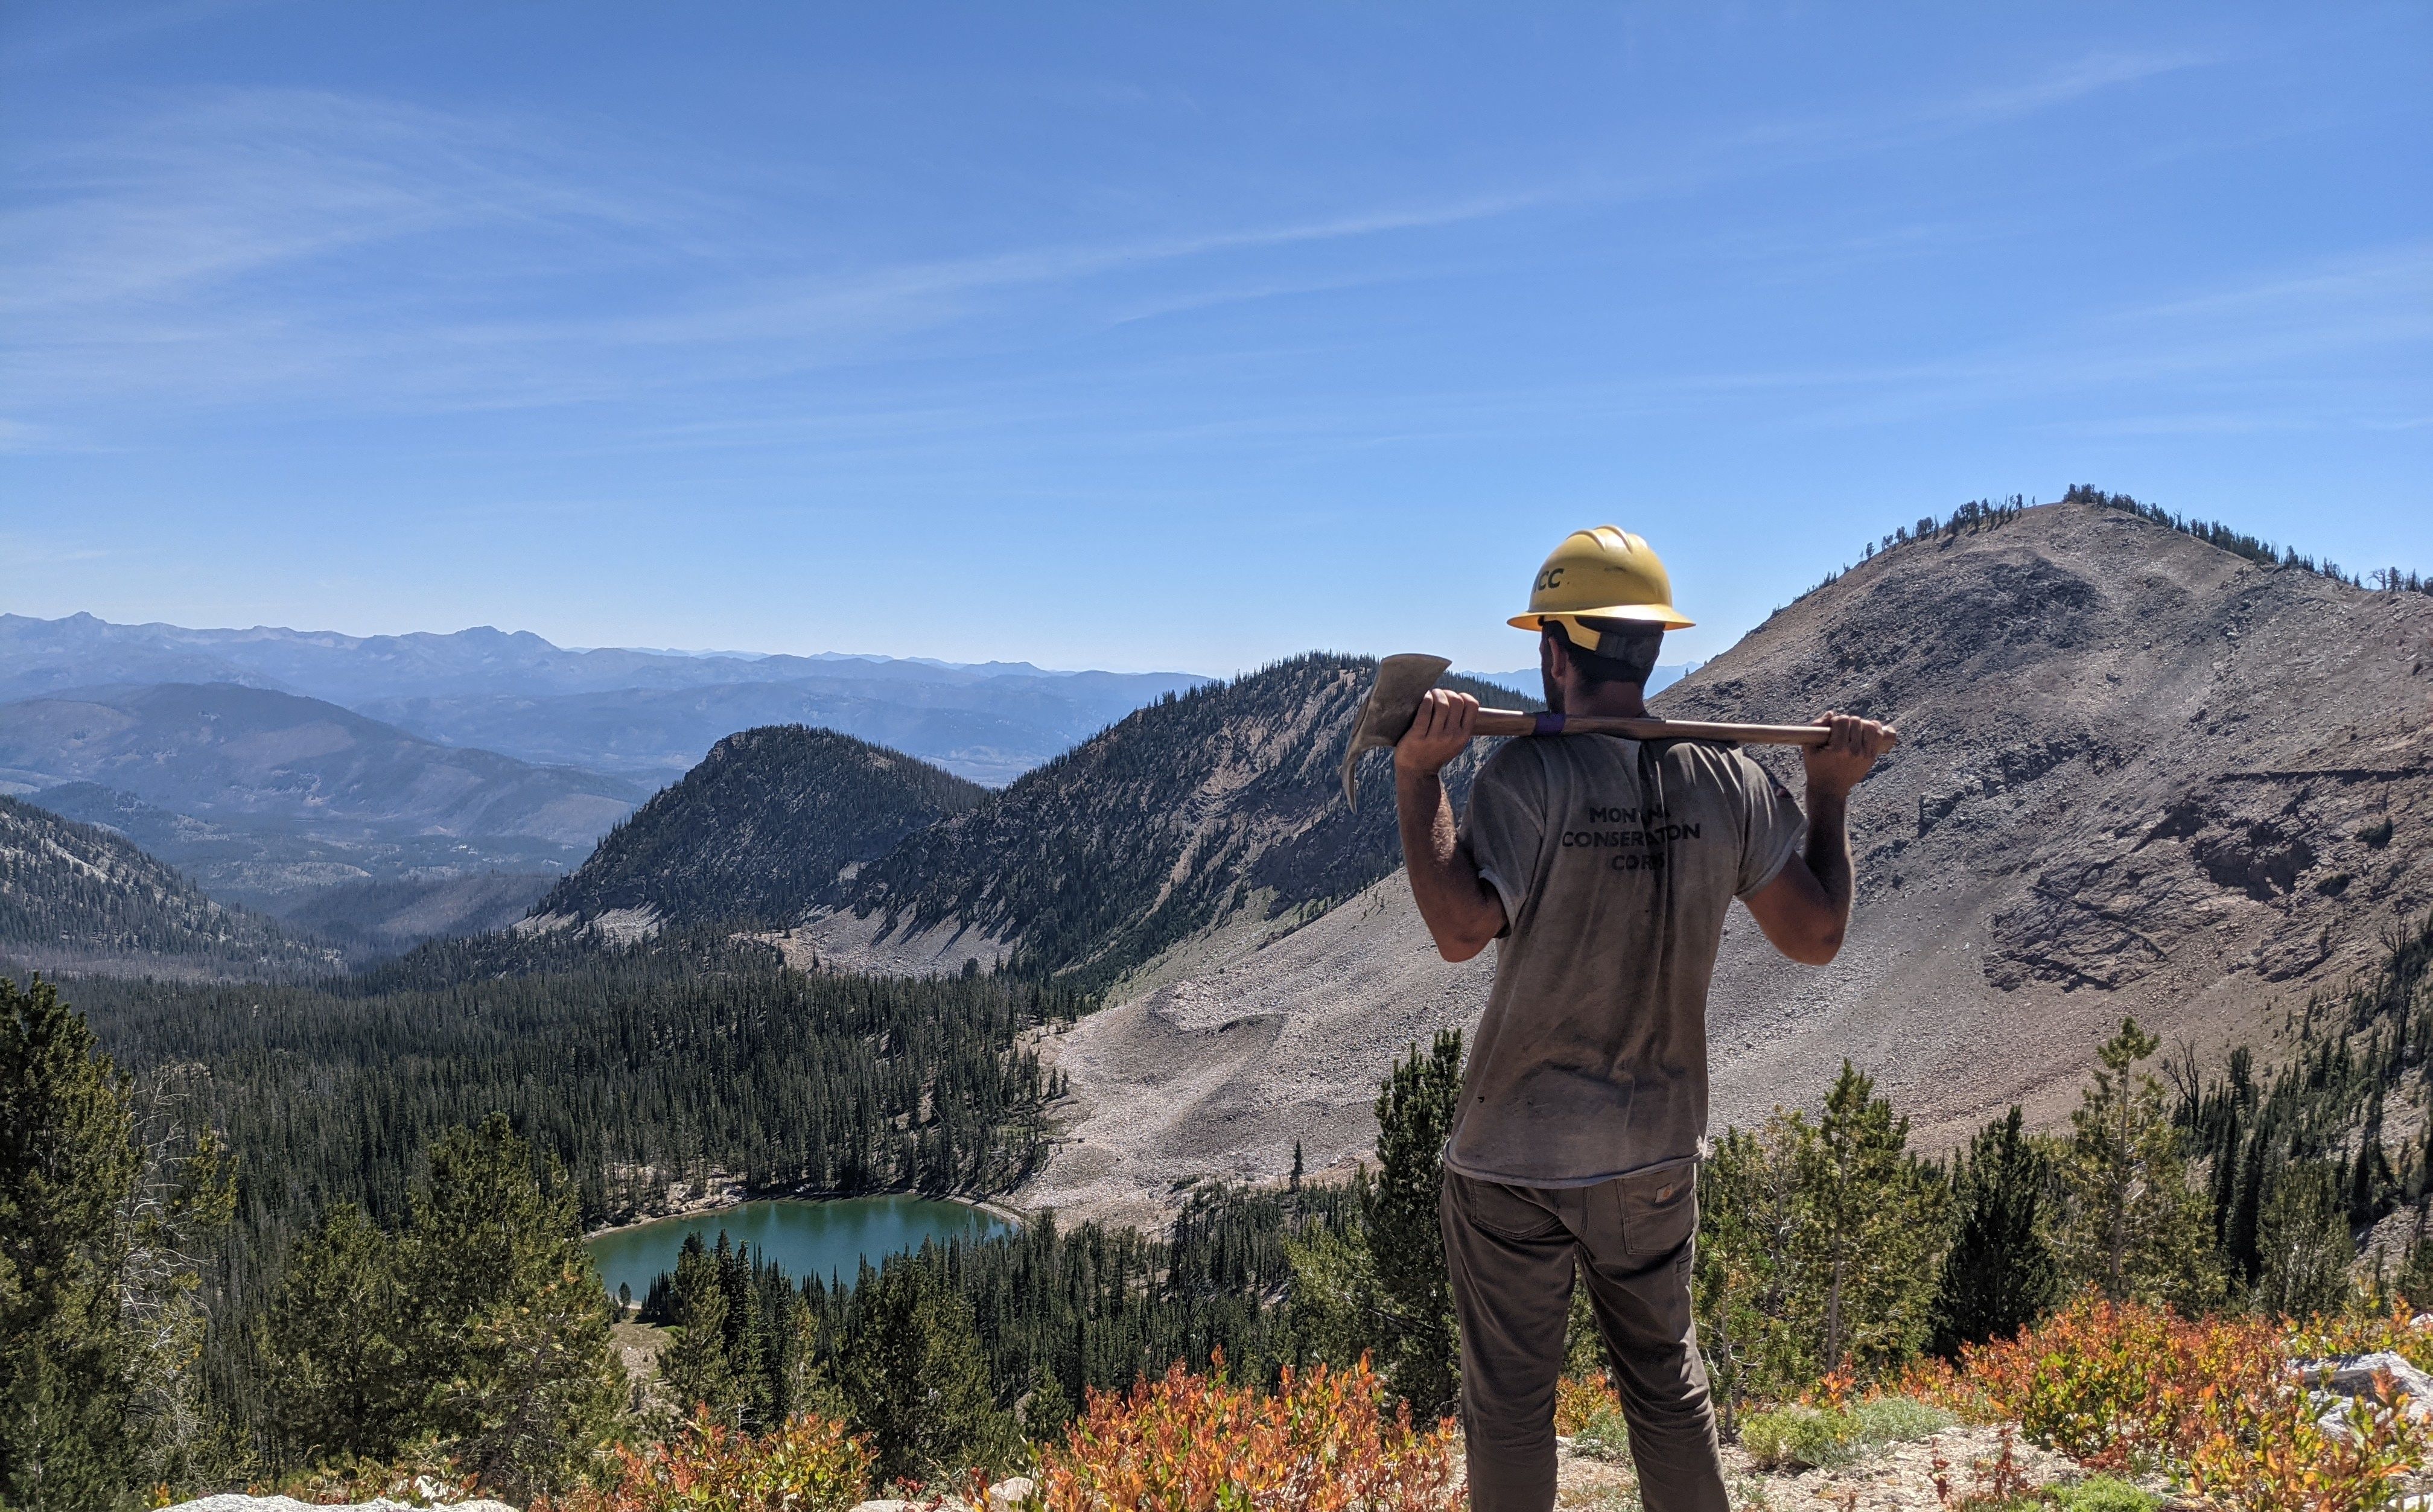 [Image Description: An MCC member, wearing their hard hat and dirt-covered uniform, is looking over a lake, surrounded by mountains of scree rock. They are holding an axe over their shoulders, taking in the beauty of the landscape.]